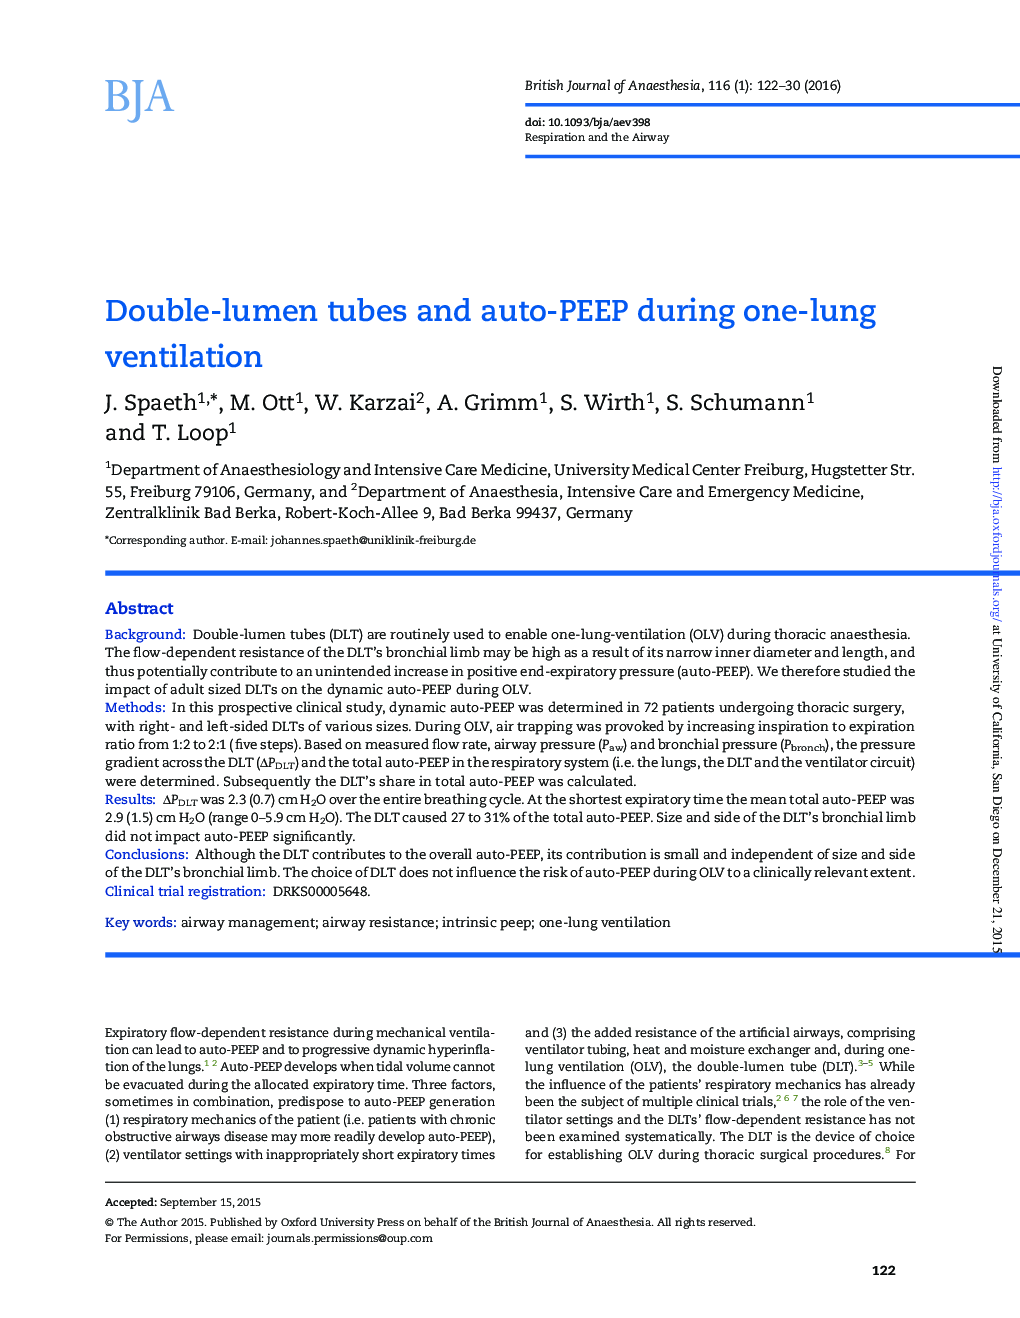 Double-lumen tubes and auto-PEEP during one-lung ventilation